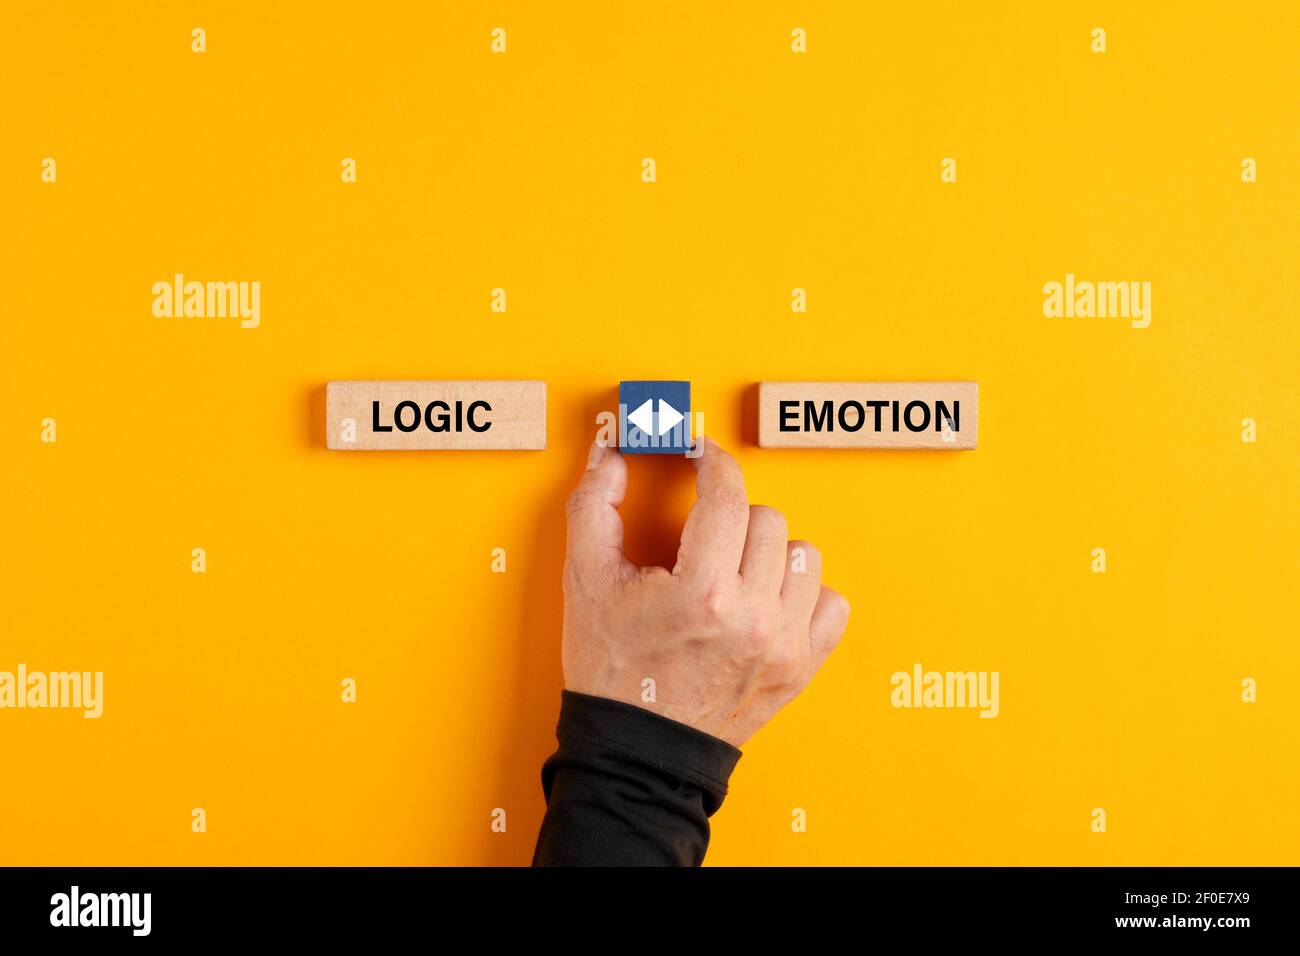 Male hand holds a wooden cube with arrow icon between the options of logic or emotion. Emotional or logical decision making concept. Stock Photo